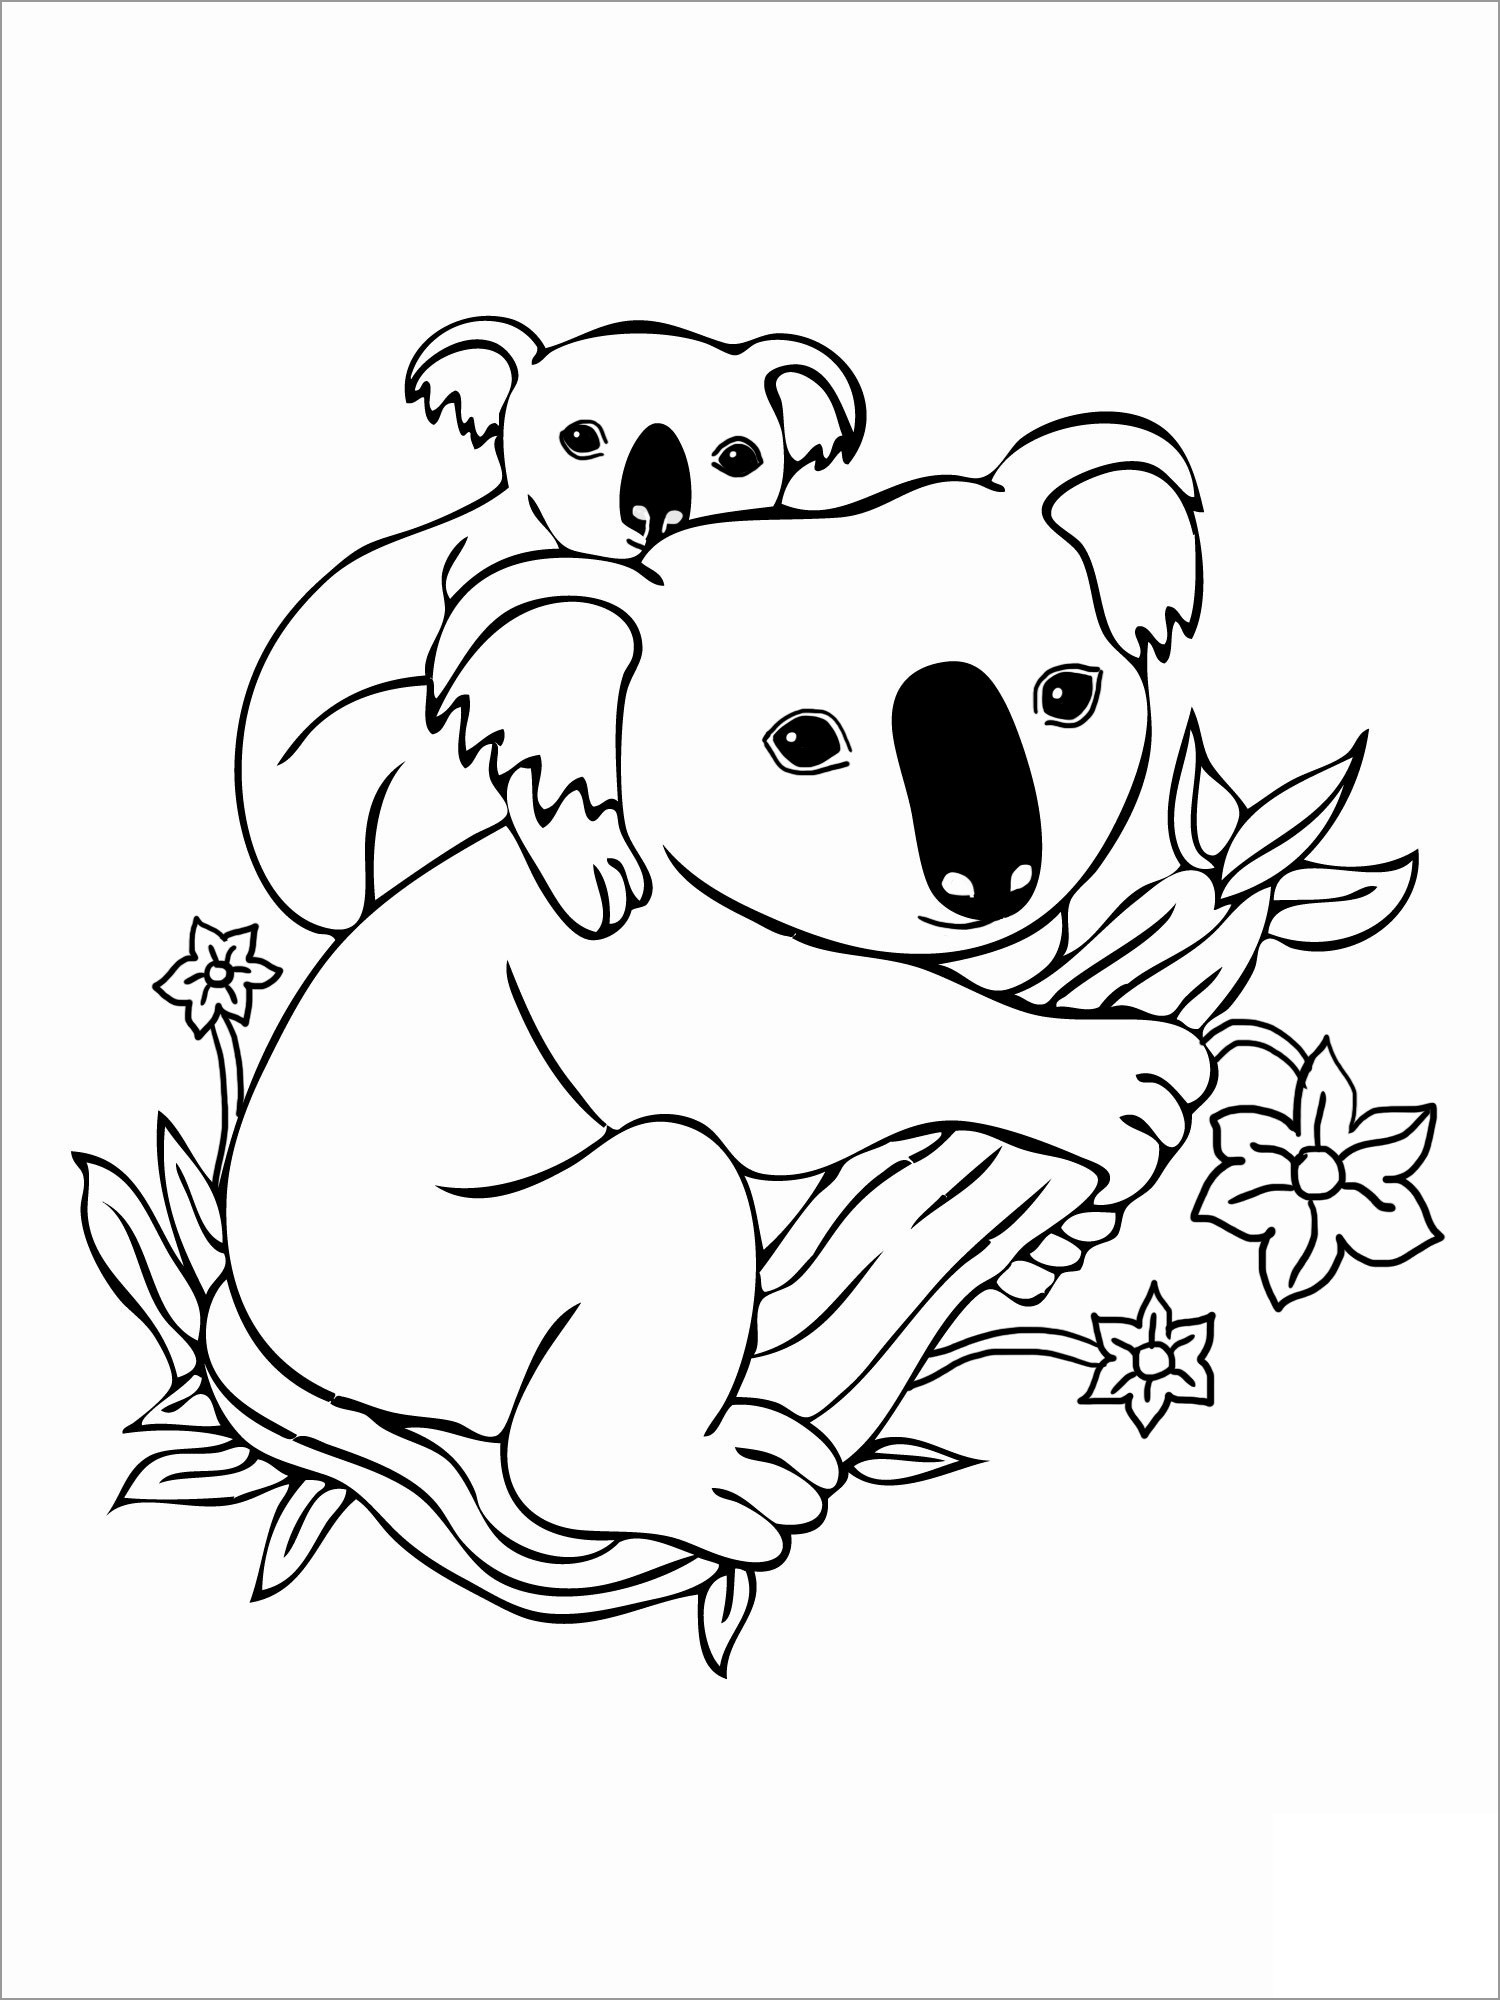 Koala Moms and Baby Coloring Page